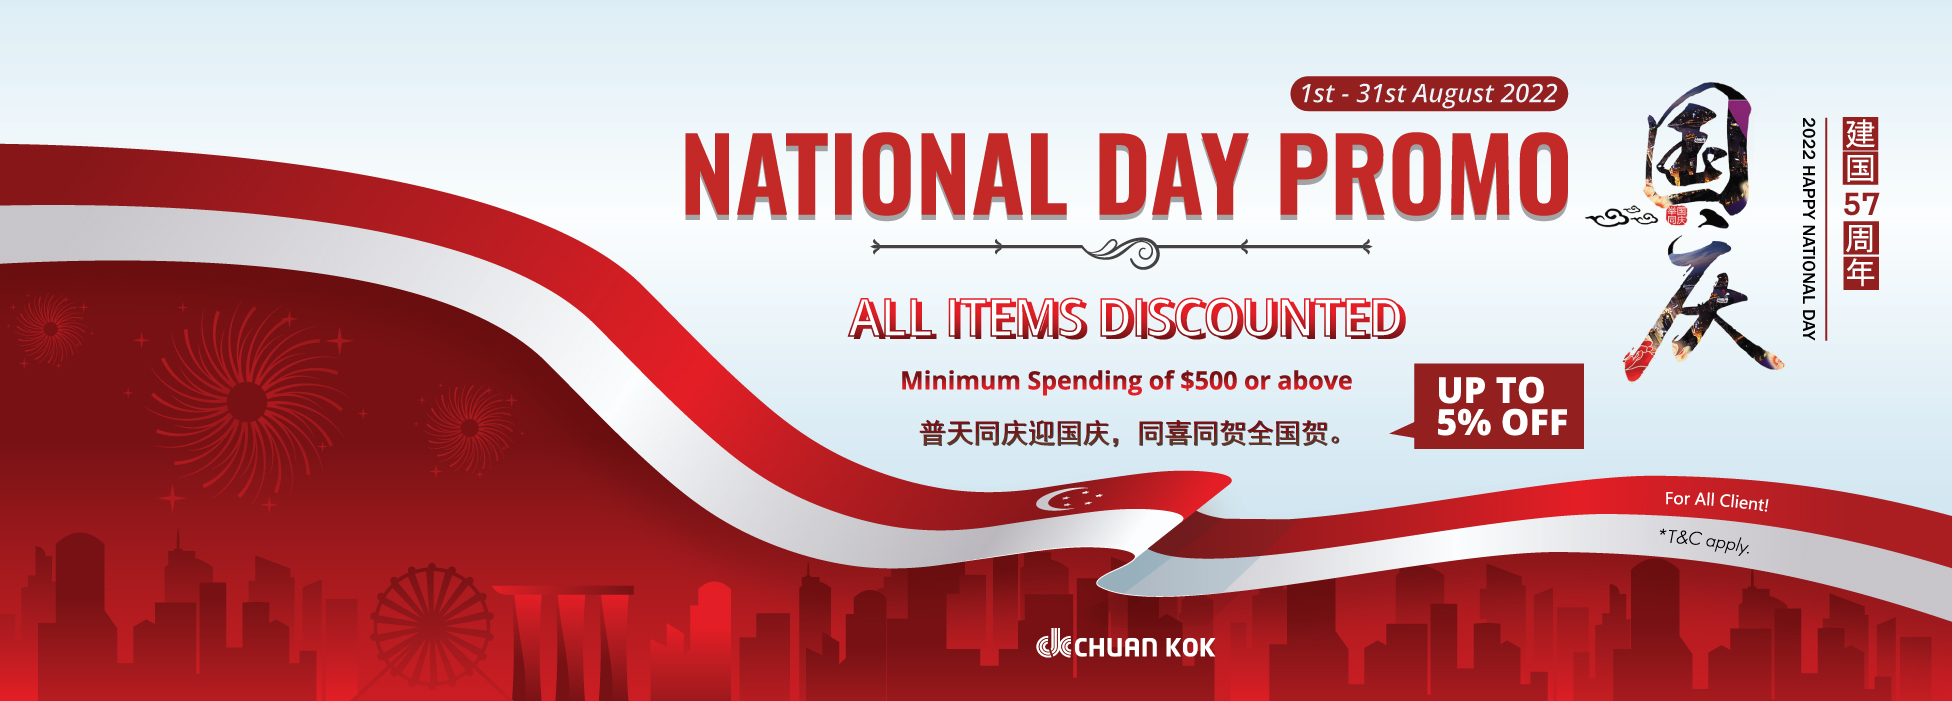 National Day Promo